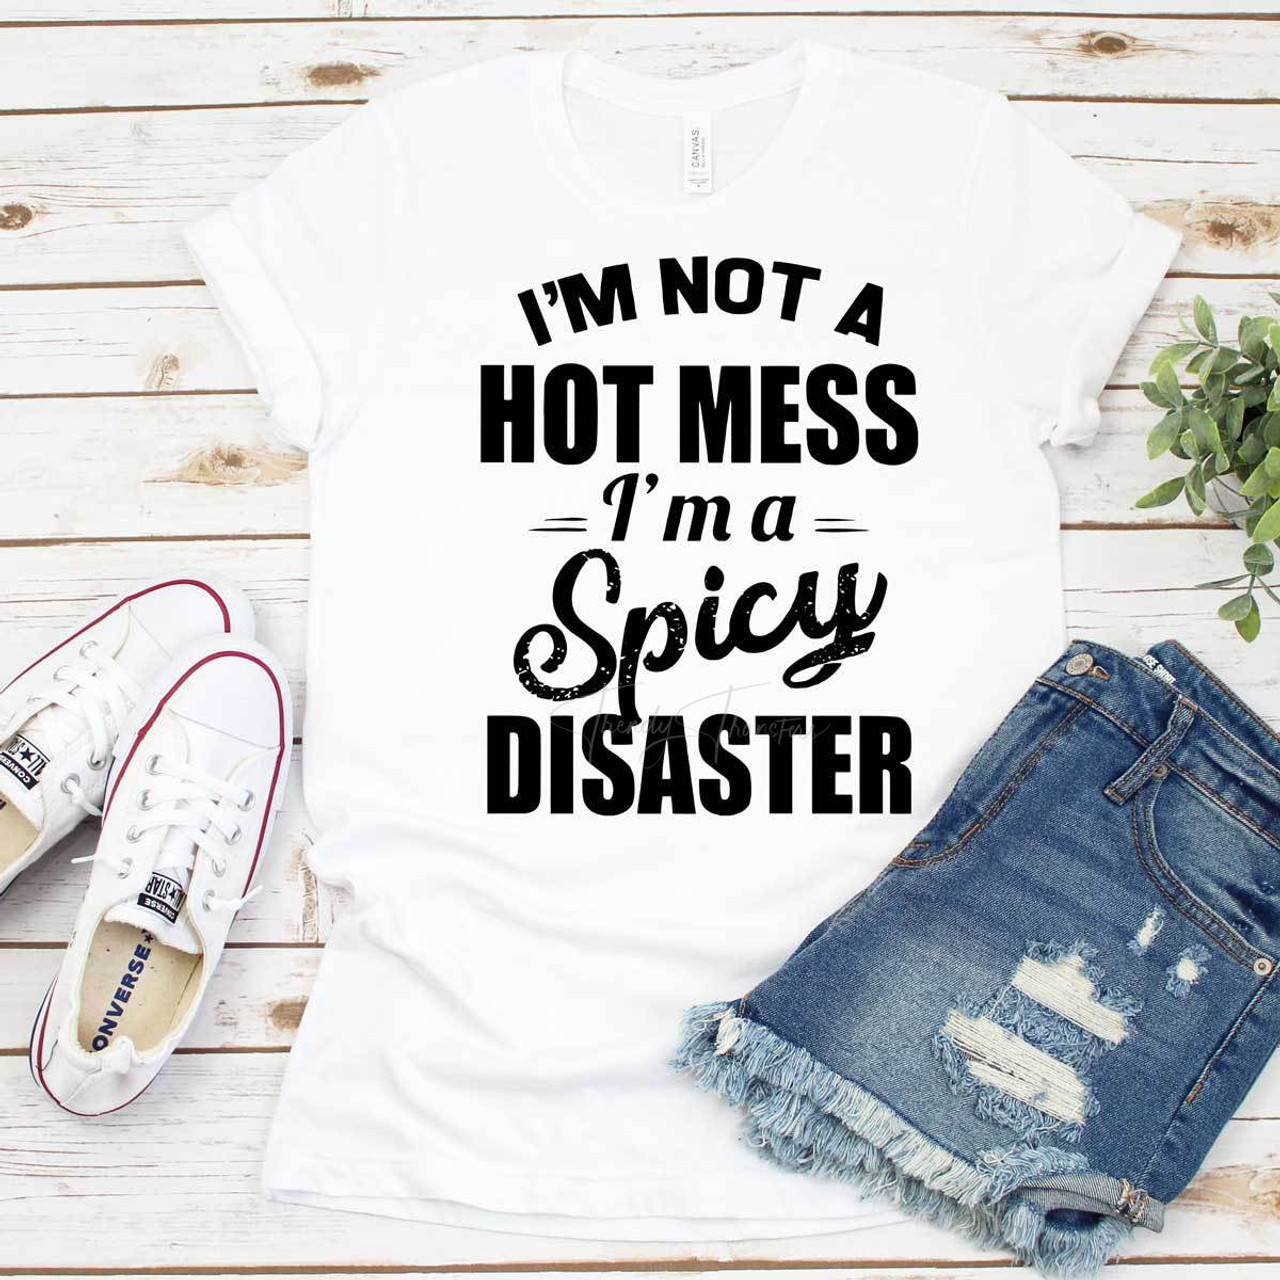 one hot mess~